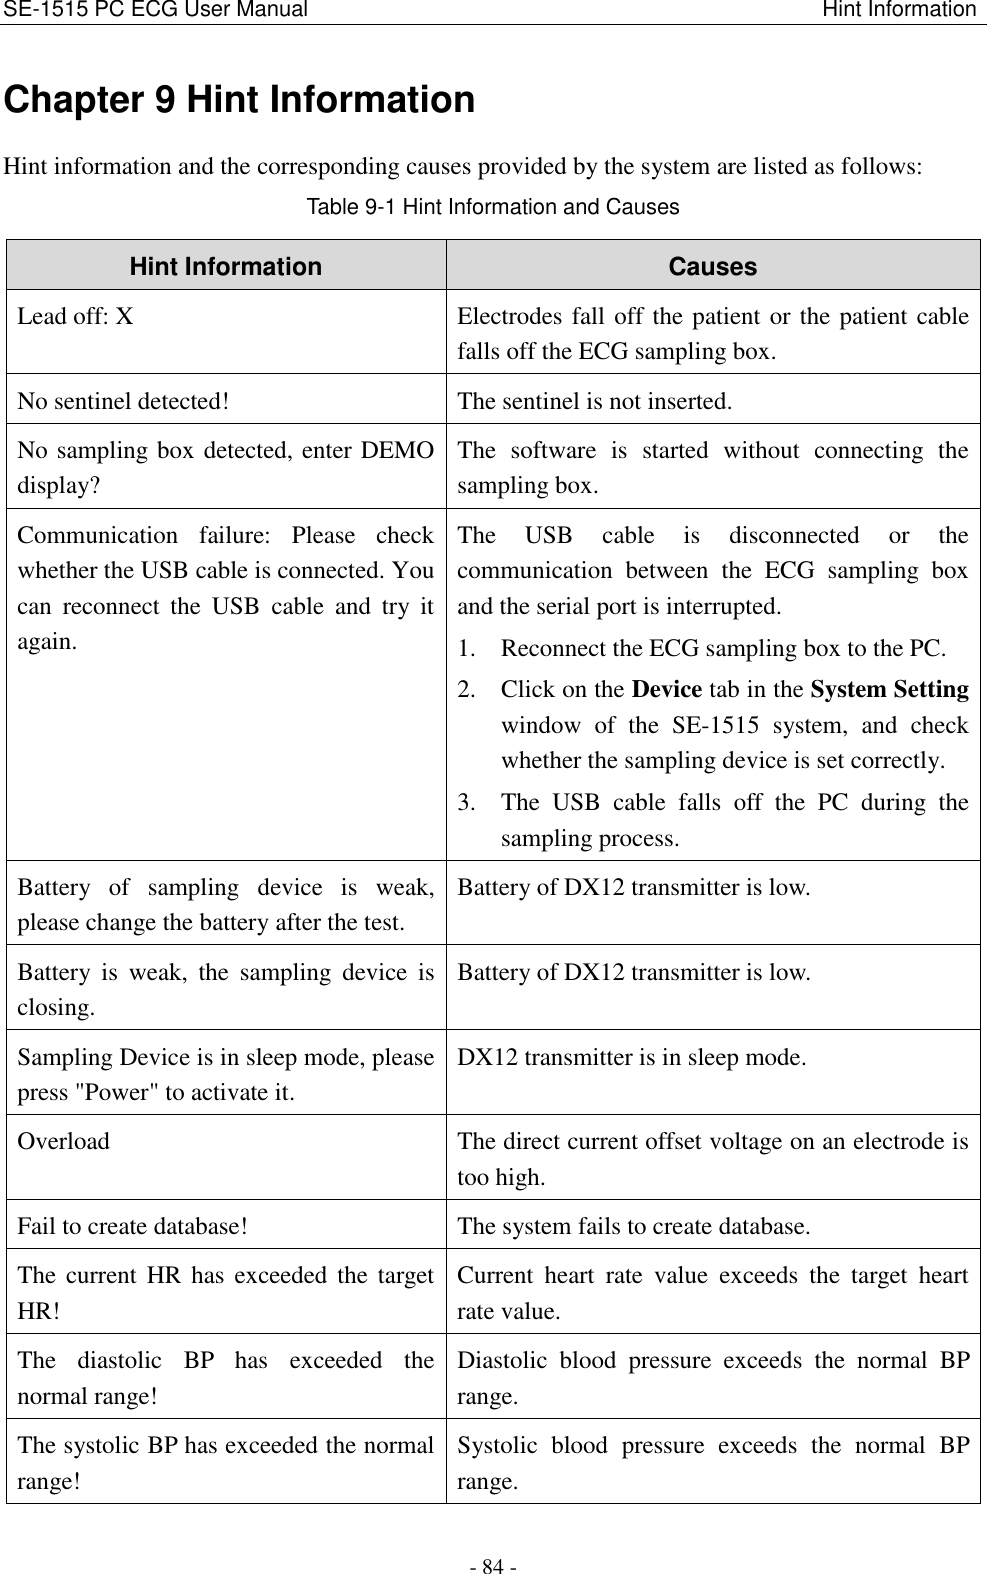 SE-1515 PC ECG User Manual                                                                            Hint Information - 84 - Chapter 9 Hint Information Hint information and the corresponding causes provided by the system are listed as follows: Table 9-1 Hint Information and Causes Hint Information Causes Lead off: X Electrodes fall off the patient or the patient cable falls off the ECG sampling box. No sentinel detected! The sentinel is not inserted. No sampling box detected, enter DEMO display? The  software  is  started  without  connecting  the sampling box. Communication  failure:  Please  check whether the USB cable is connected. You can  reconnect  the  USB  cable  and  try  it again. The  USB  cable  is  disconnected  or  the communication  between  the  ECG  sampling  box and the serial port is interrupted. 1. Reconnect the ECG sampling box to the PC. 2. Click on the Device tab in the System Setting window  of  the  SE-1515  system,  and  check whether the sampling device is set correctly. 3. The  USB  cable  falls  off  the  PC  during  the sampling process. Battery  of  sampling  device  is  weak, please change the battery after the test. Battery of DX12 transmitter is low. Battery  is  weak,  the  sampling  device  is closing. Battery of DX12 transmitter is low. Sampling Device is in sleep mode, please press &quot;Power&quot; to activate it. DX12 transmitter is in sleep mode. Overload The direct current offset voltage on an electrode is too high. Fail to create database! The system fails to create database. The current  HR  has  exceeded the  target HR! Current  heart  rate  value  exceeds  the  target  heart rate value. The  diastolic  BP  has  exceeded  the normal range! Diastolic  blood  pressure  exceeds  the  normal  BP range. The systolic BP has exceeded the normal range! Systolic  blood  pressure  exceeds  the  normal  BP range. 